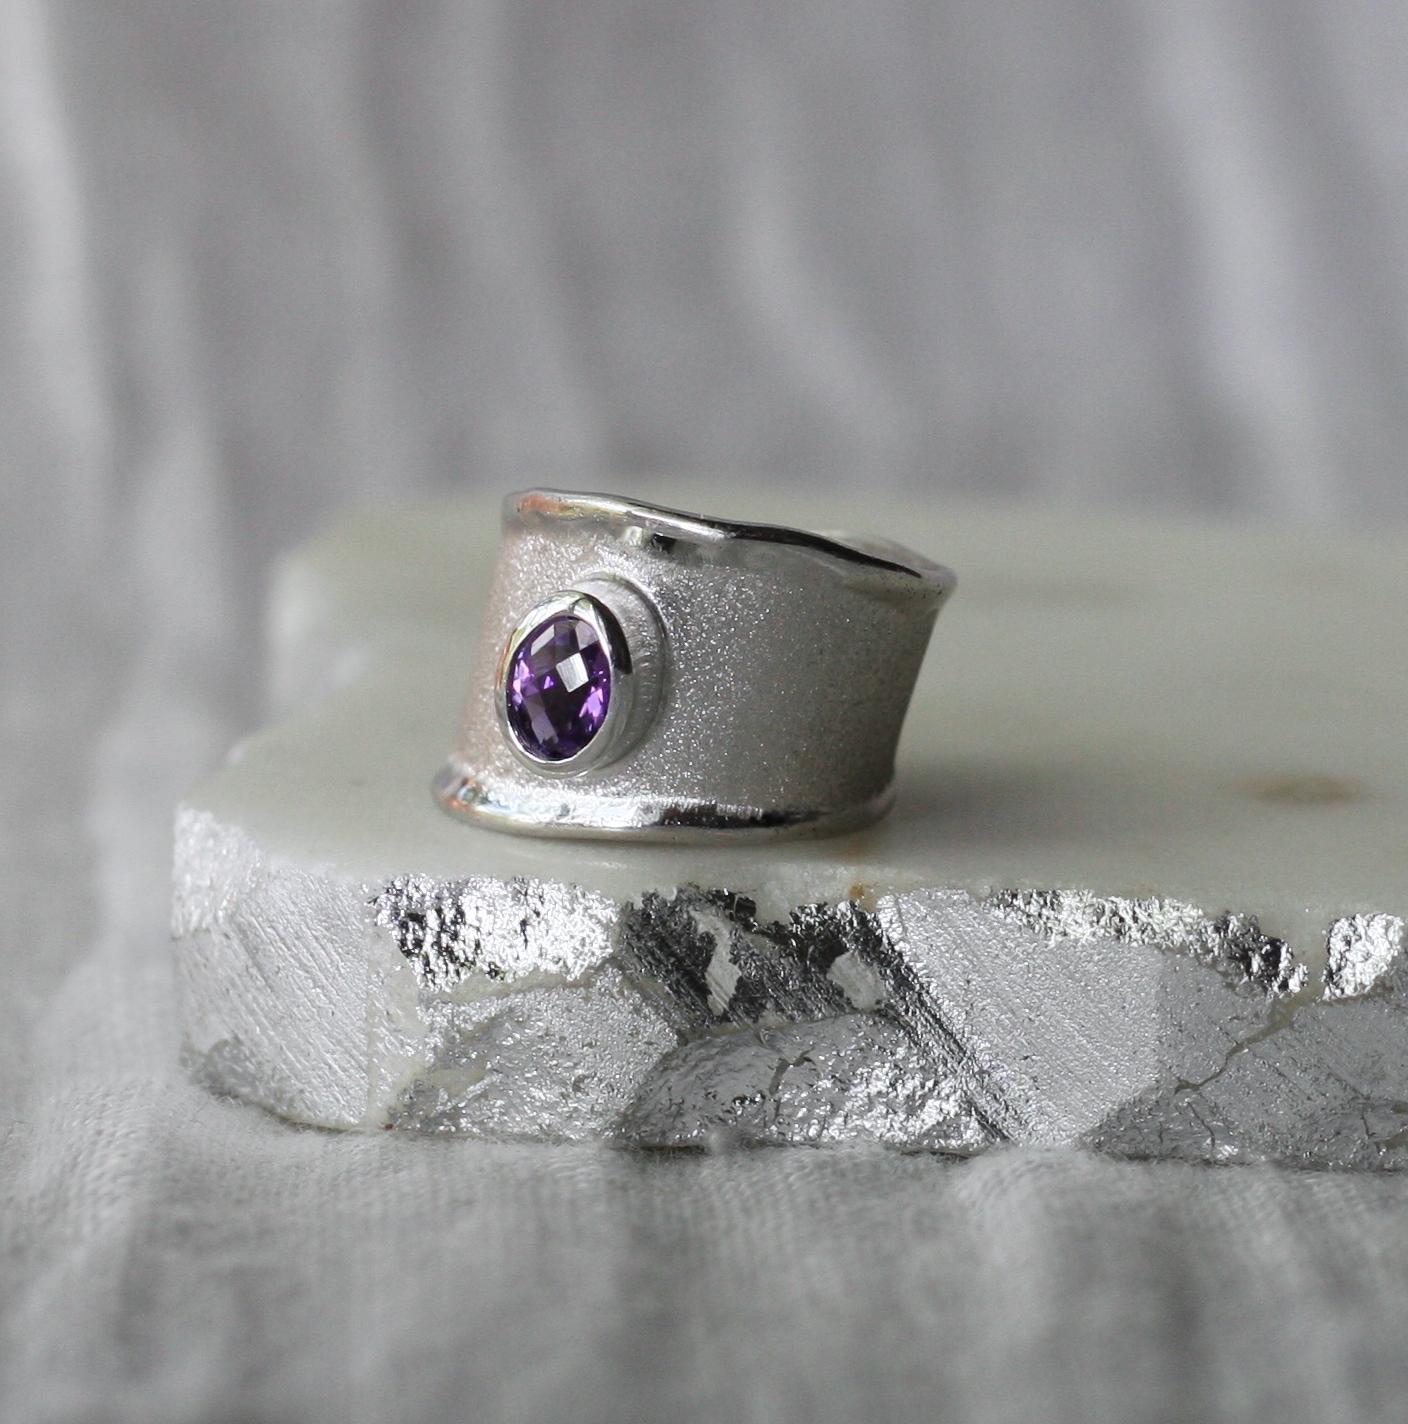 Presenting Yianni Creations fine silver artisan ring from Ammos Collection featuring 0.85 Carat oval cut amethyst. The unique look of this simplified band is created by ancient techniques of craftsmanship - brushed texture and nature-inspired liquid